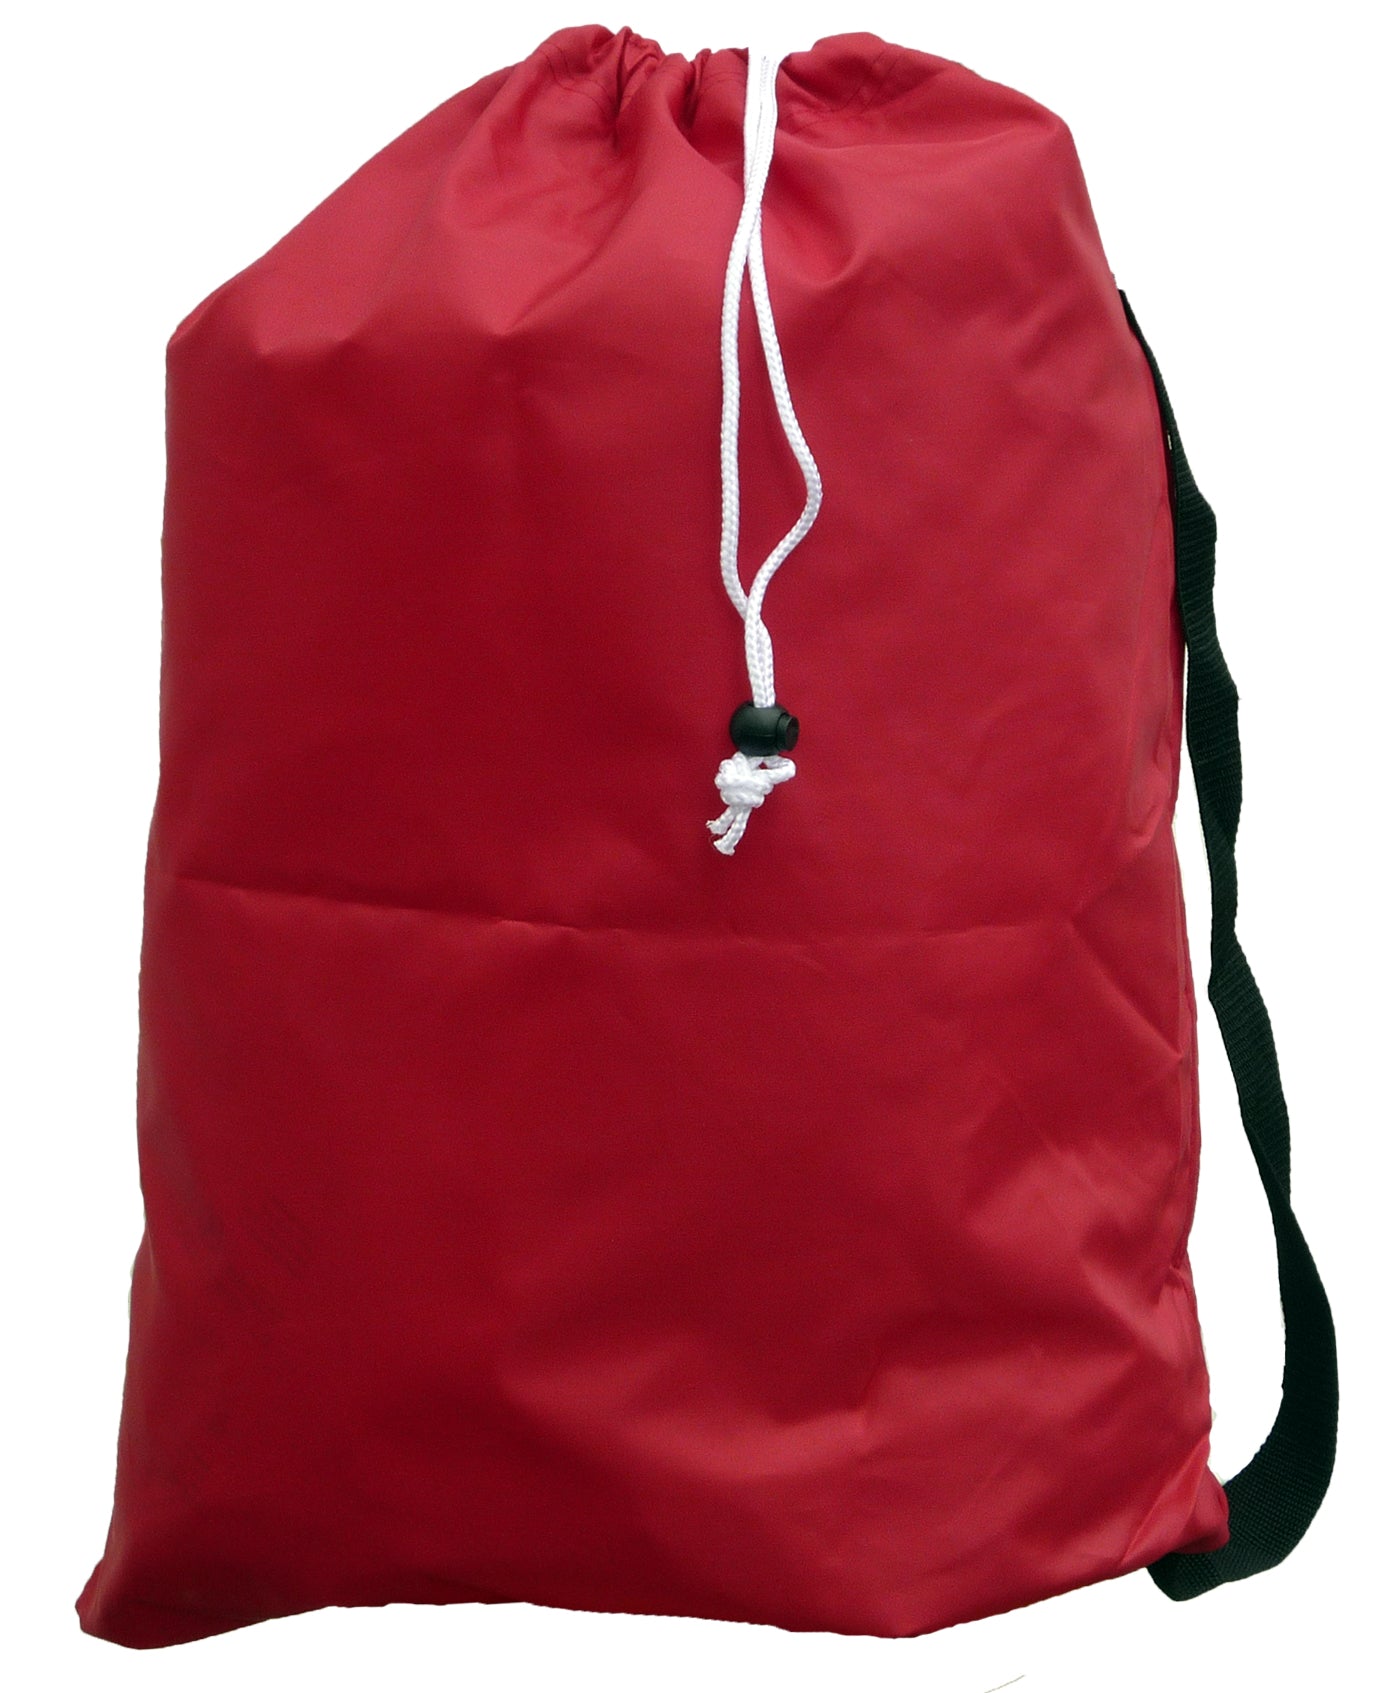 Small Laundry Bag with Strap, Red